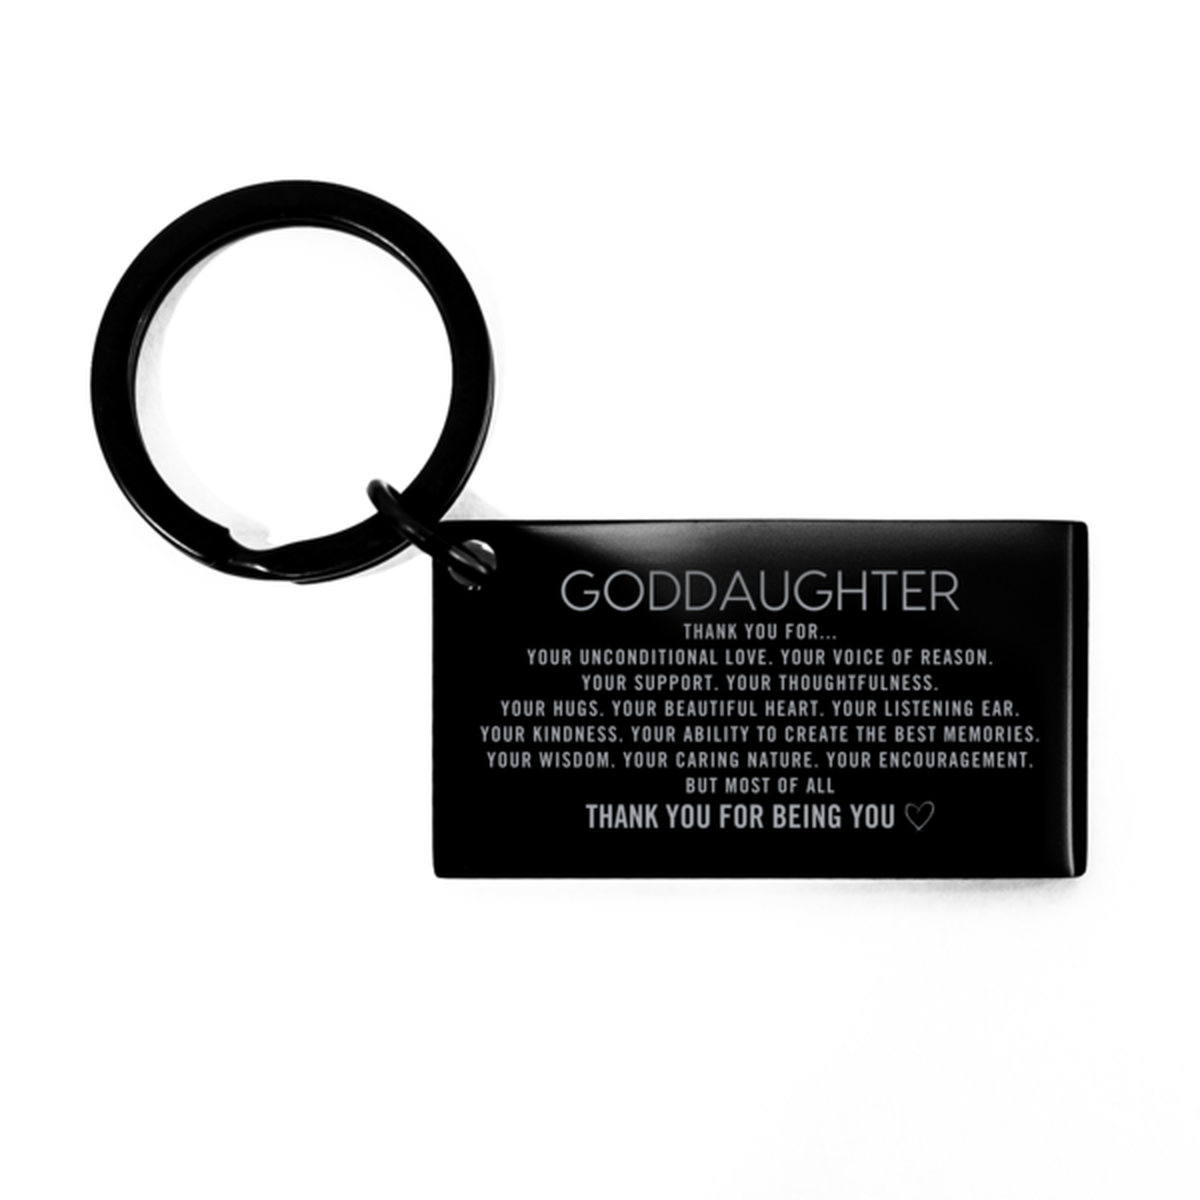 Goddaughter Keychain Custom, Engraved Gifts For Goddaughter Christmas Graduation Birthday Gifts for Men Women Goddaughter Thank you for Your unconditional love